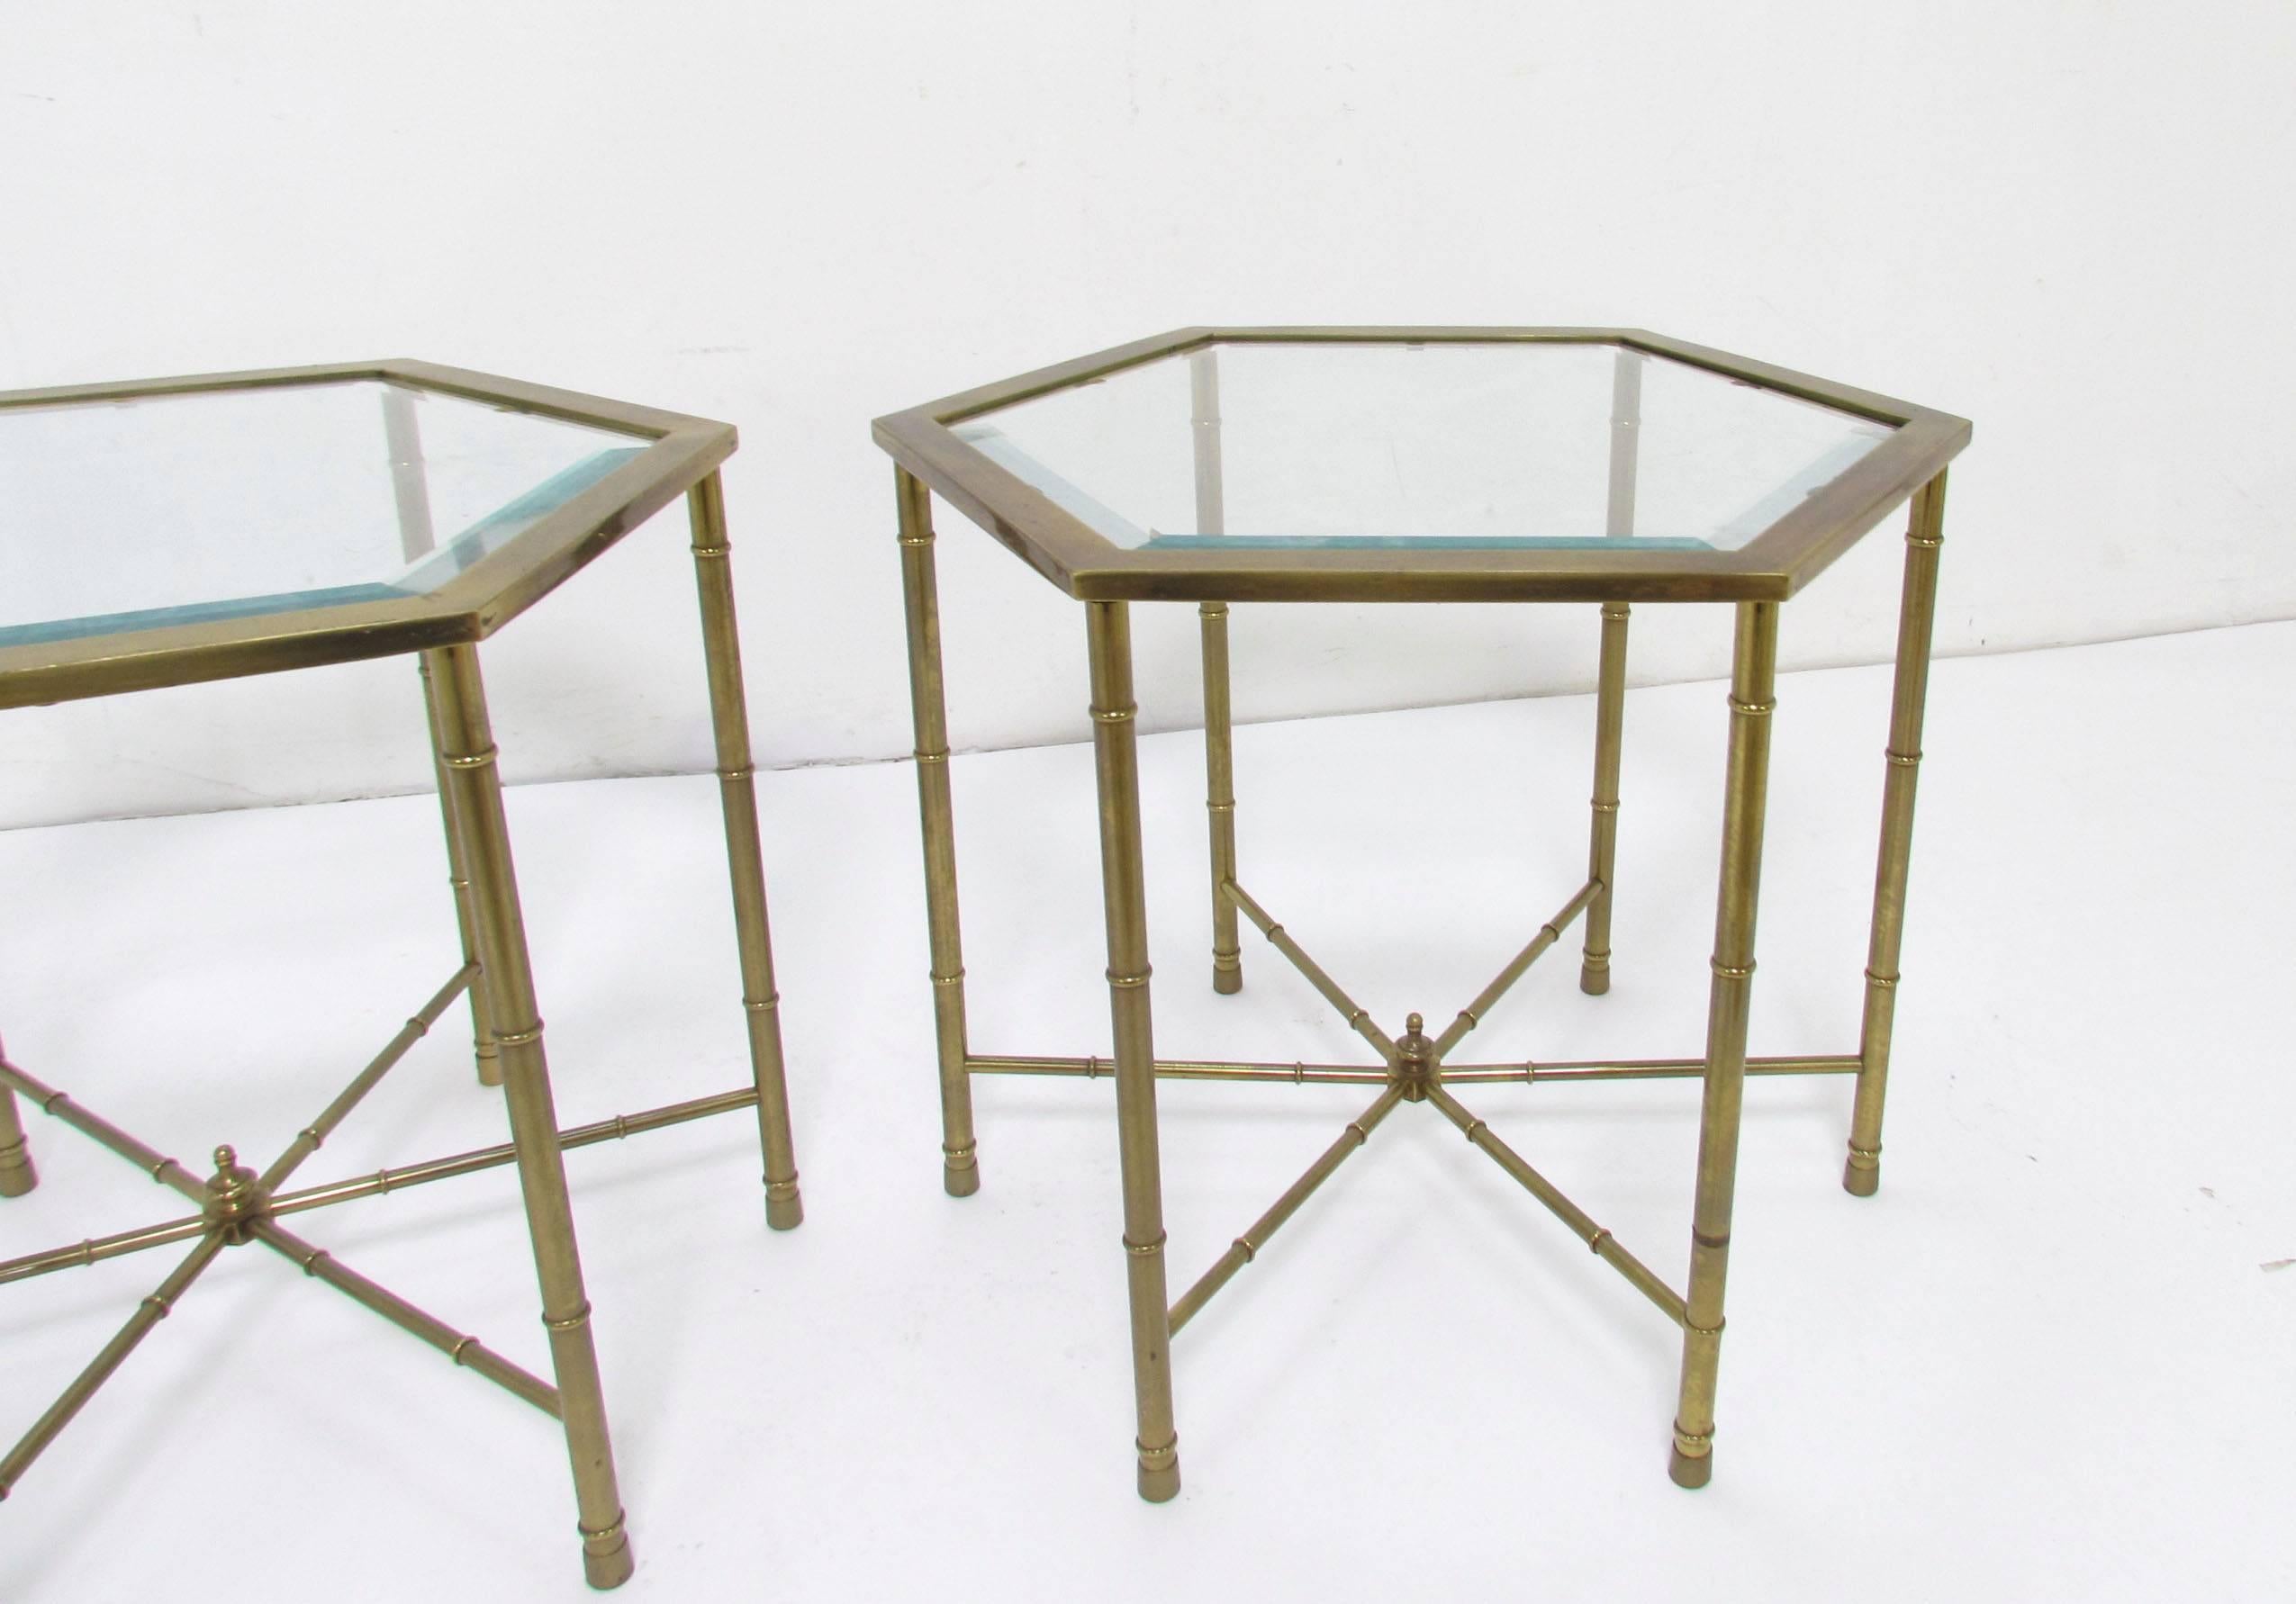 Pair of Hollywood Regency style hexagonal side tables in solid brass with beveled glass tops by Mastercraft, circa 1970s.